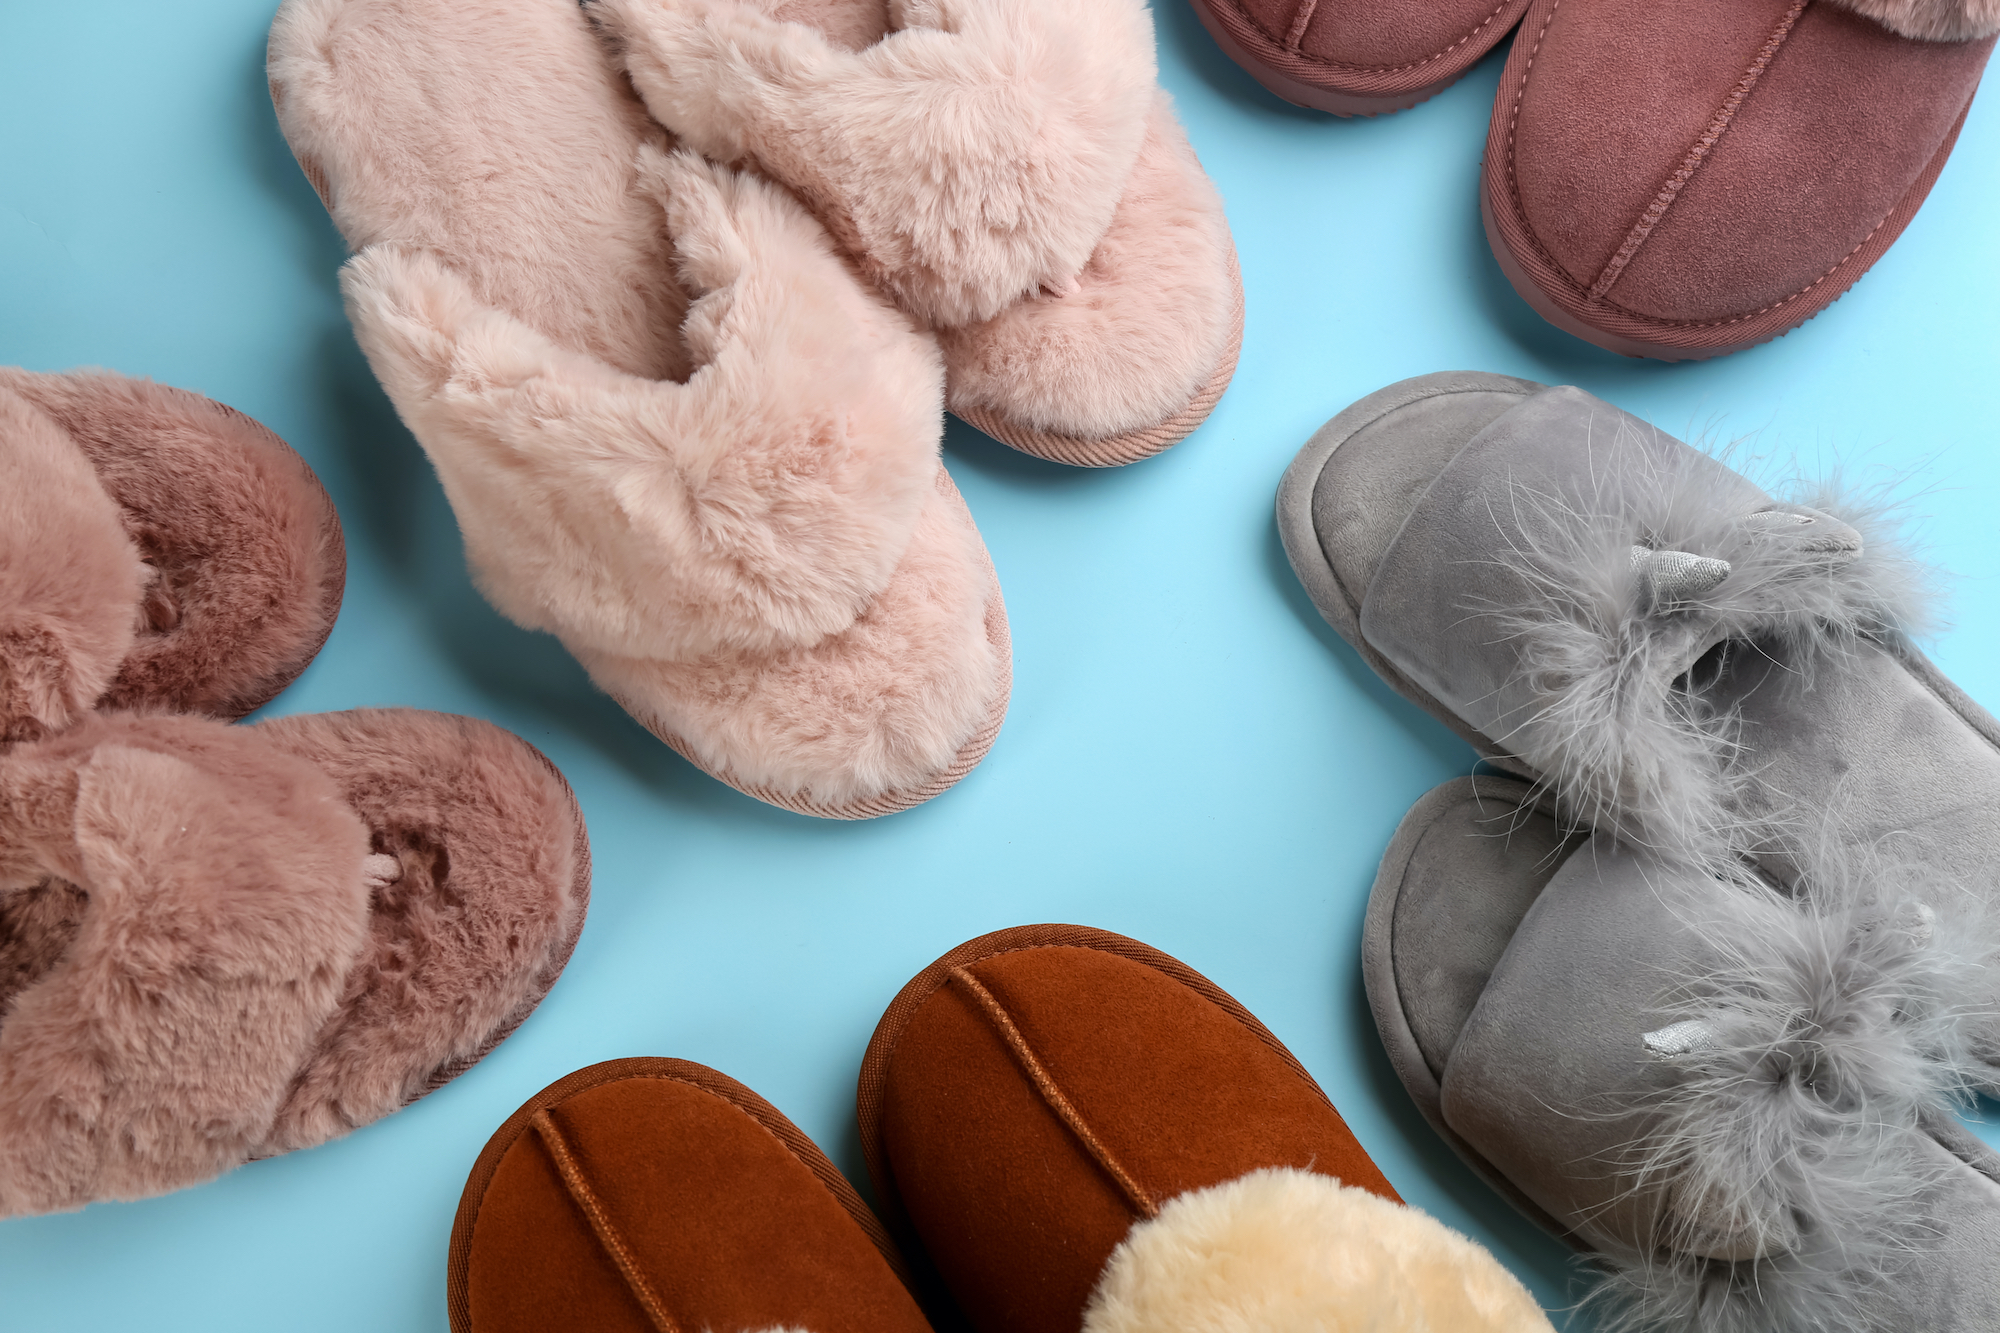 ugg type slippers